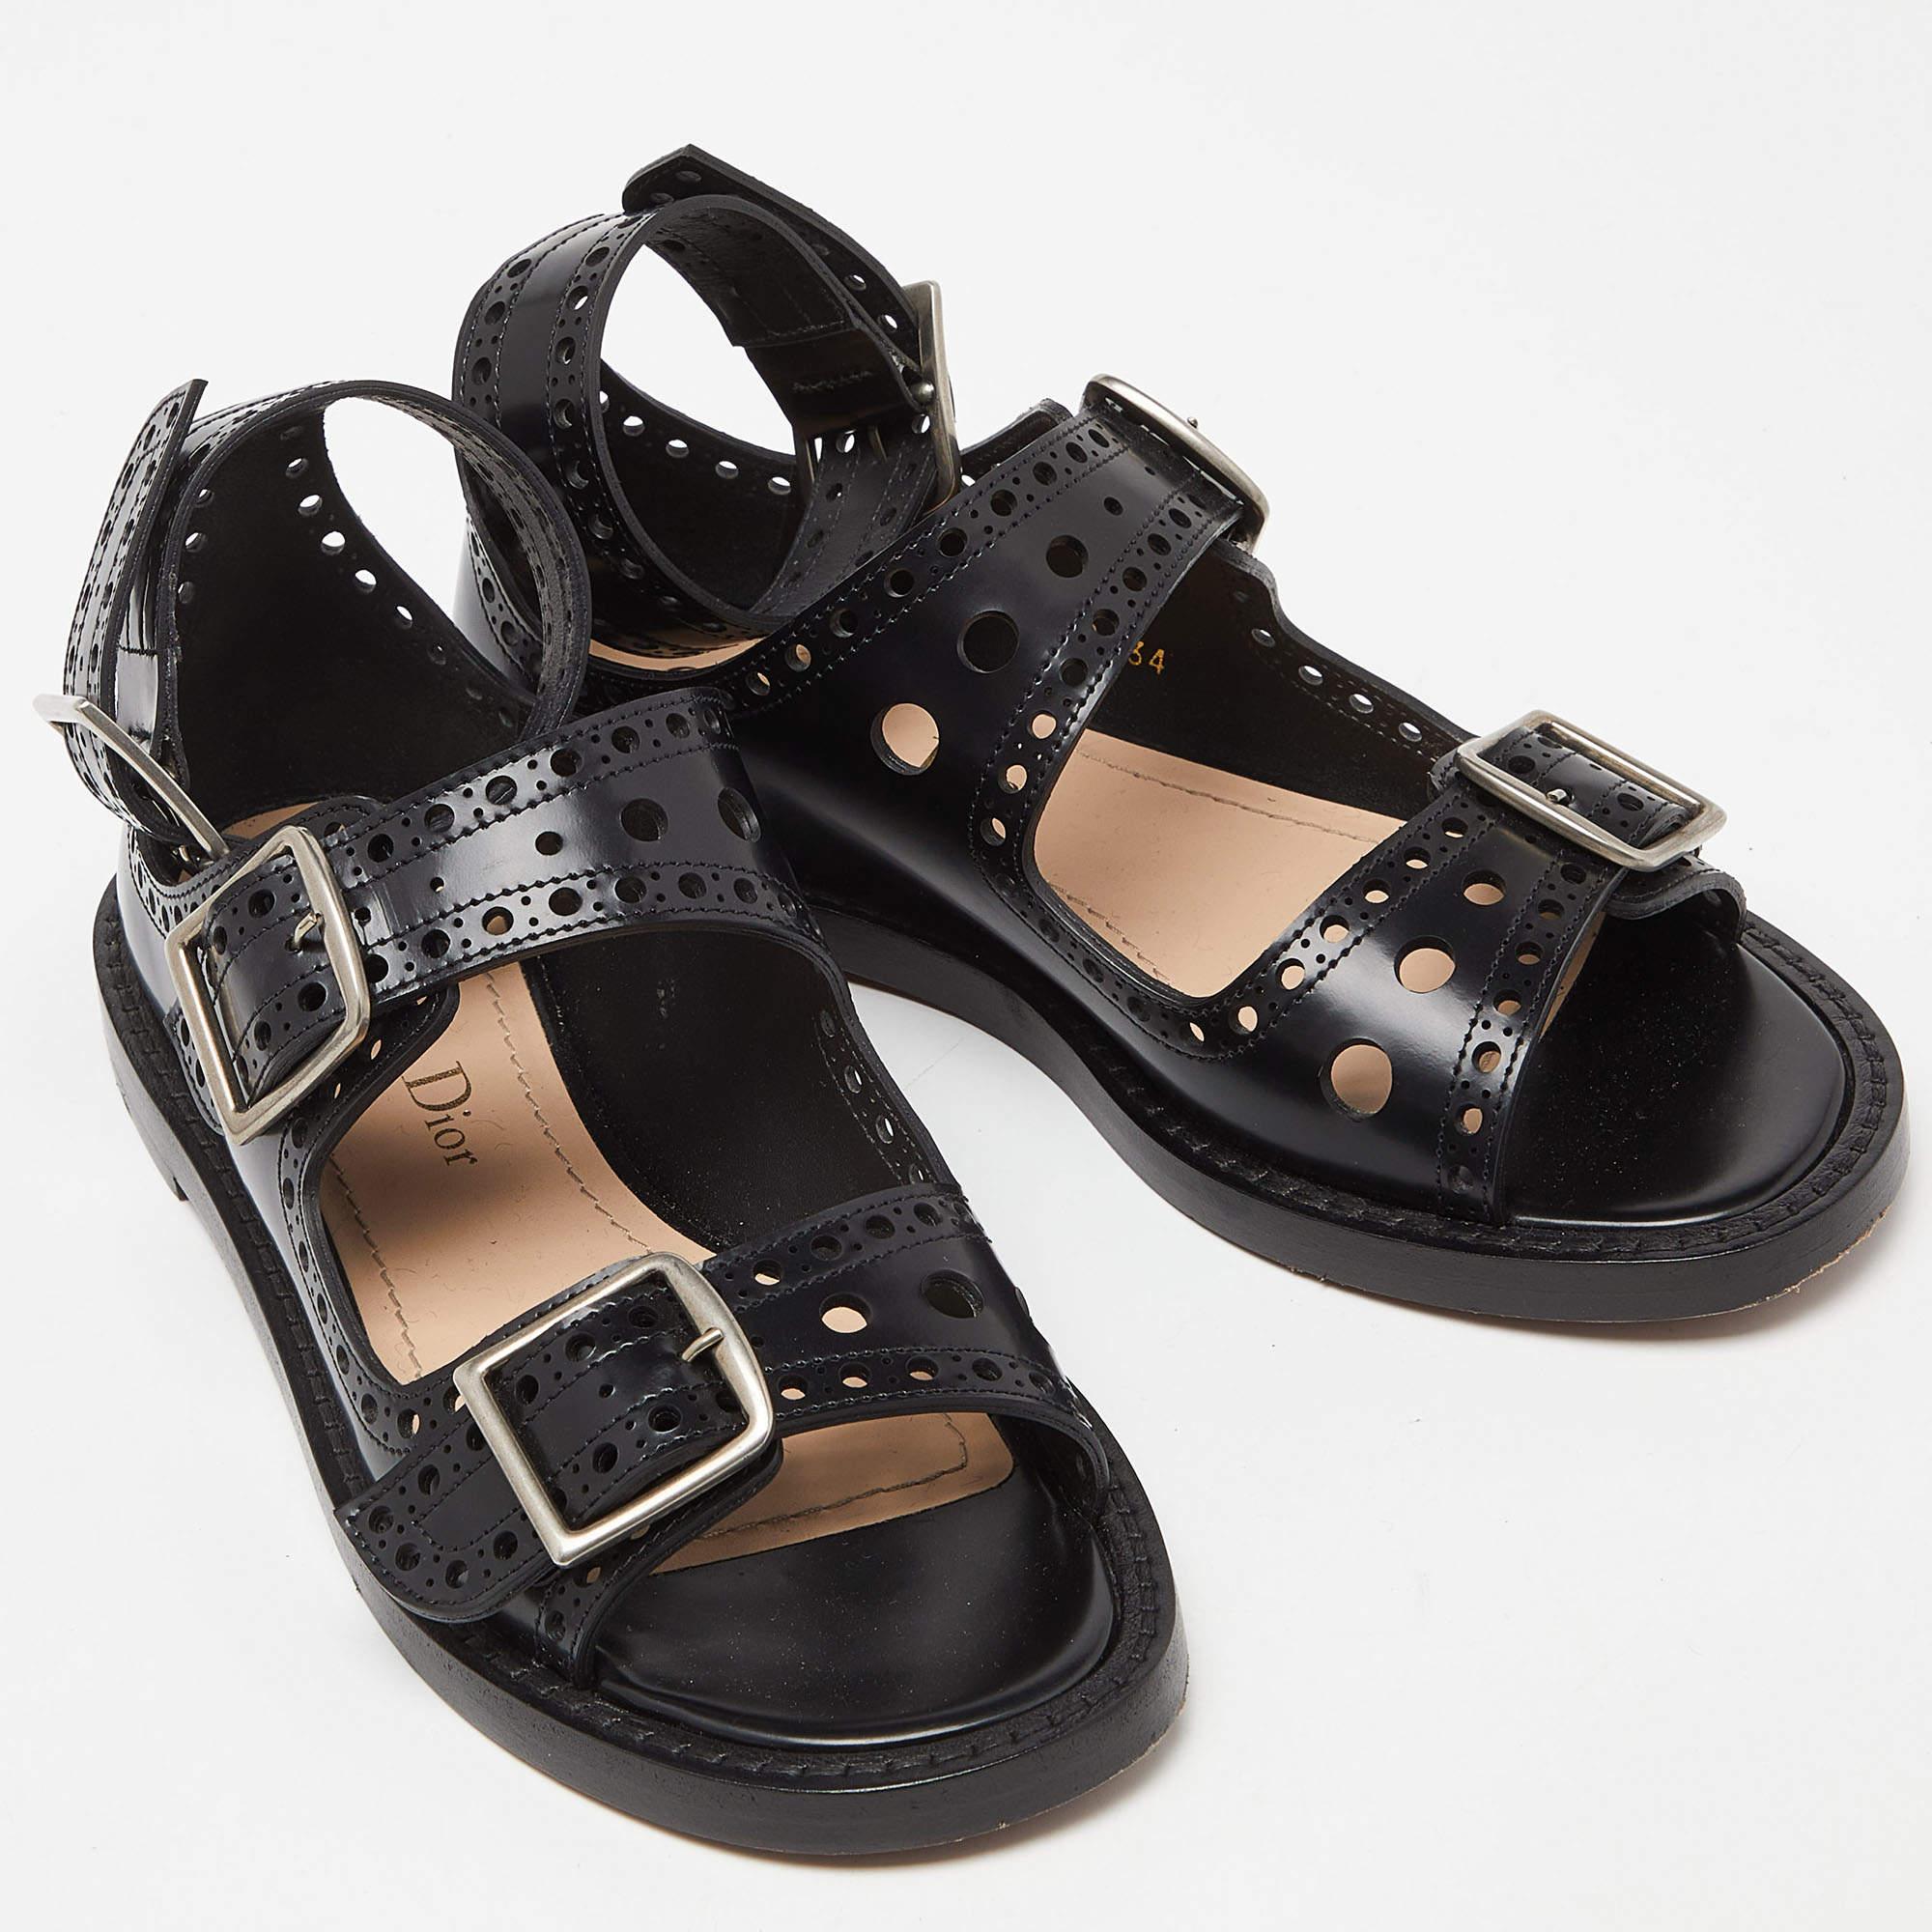 Dior Black Perforated Leather Teddy D Buckles Flat Sandals Size 34 In Good Condition For Sale In Dubai, Al Qouz 2